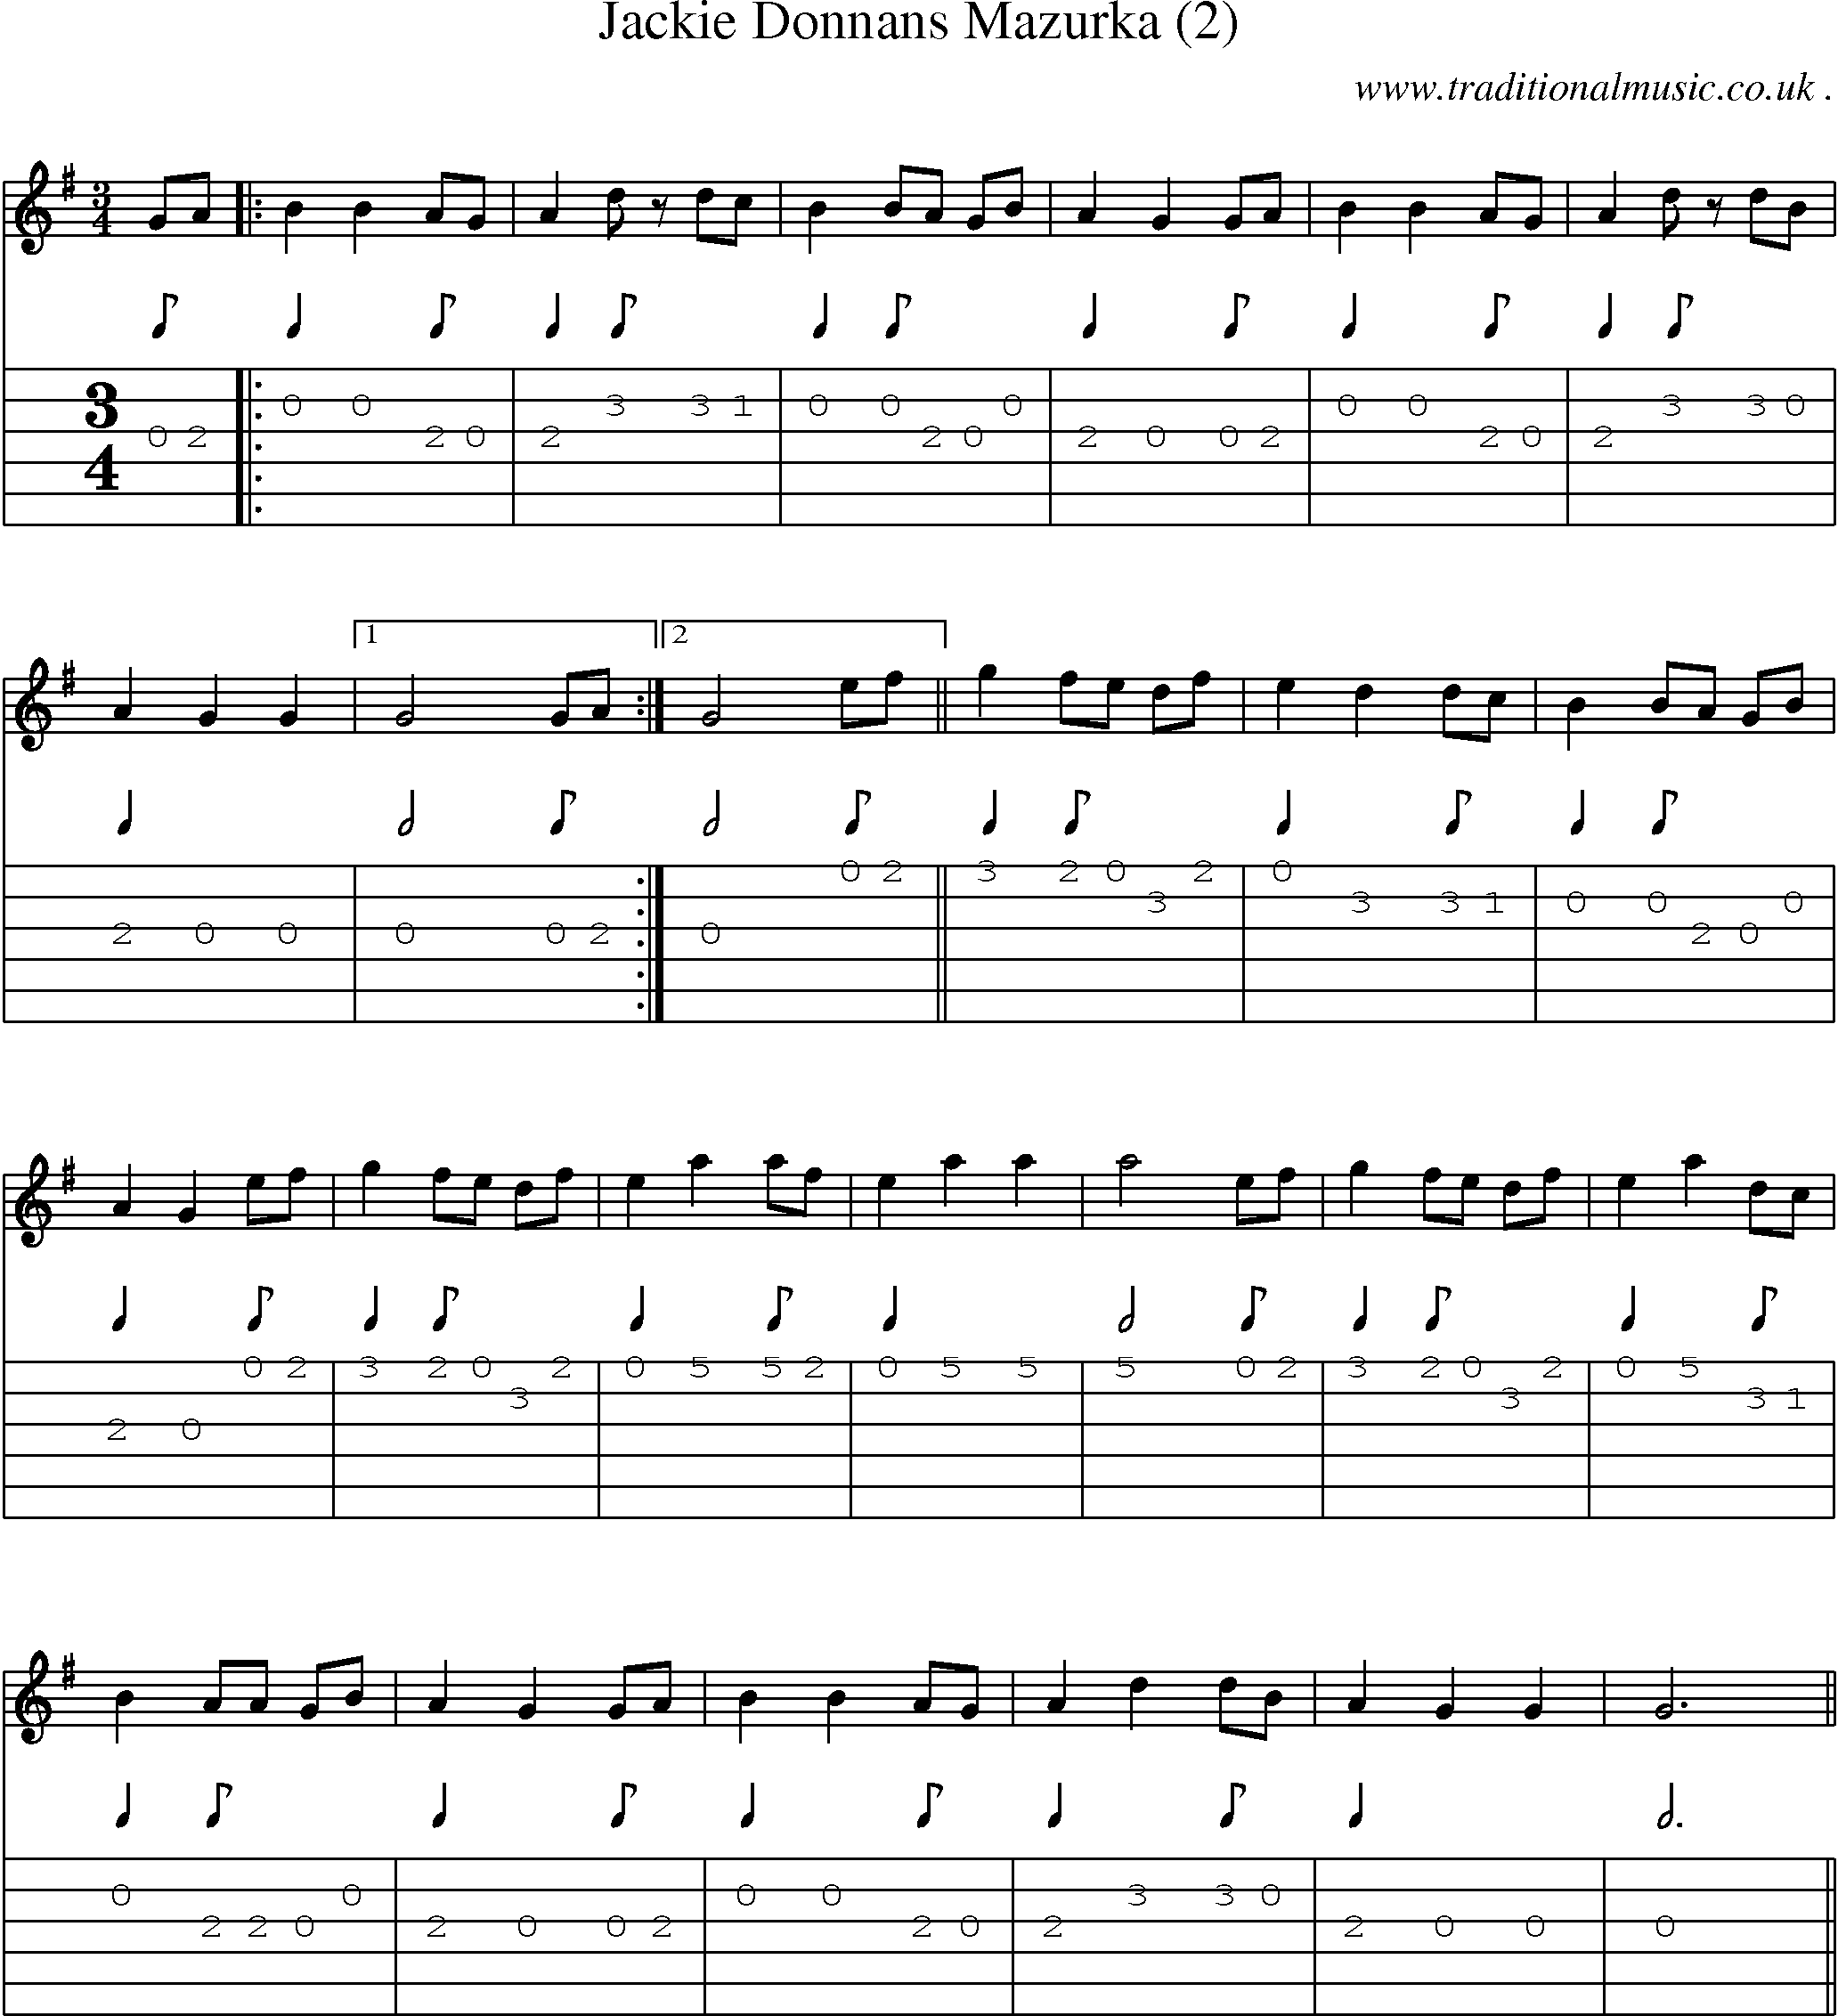 Sheet-Music and Guitar Tabs for Jackie Donnans Mazurka (2)